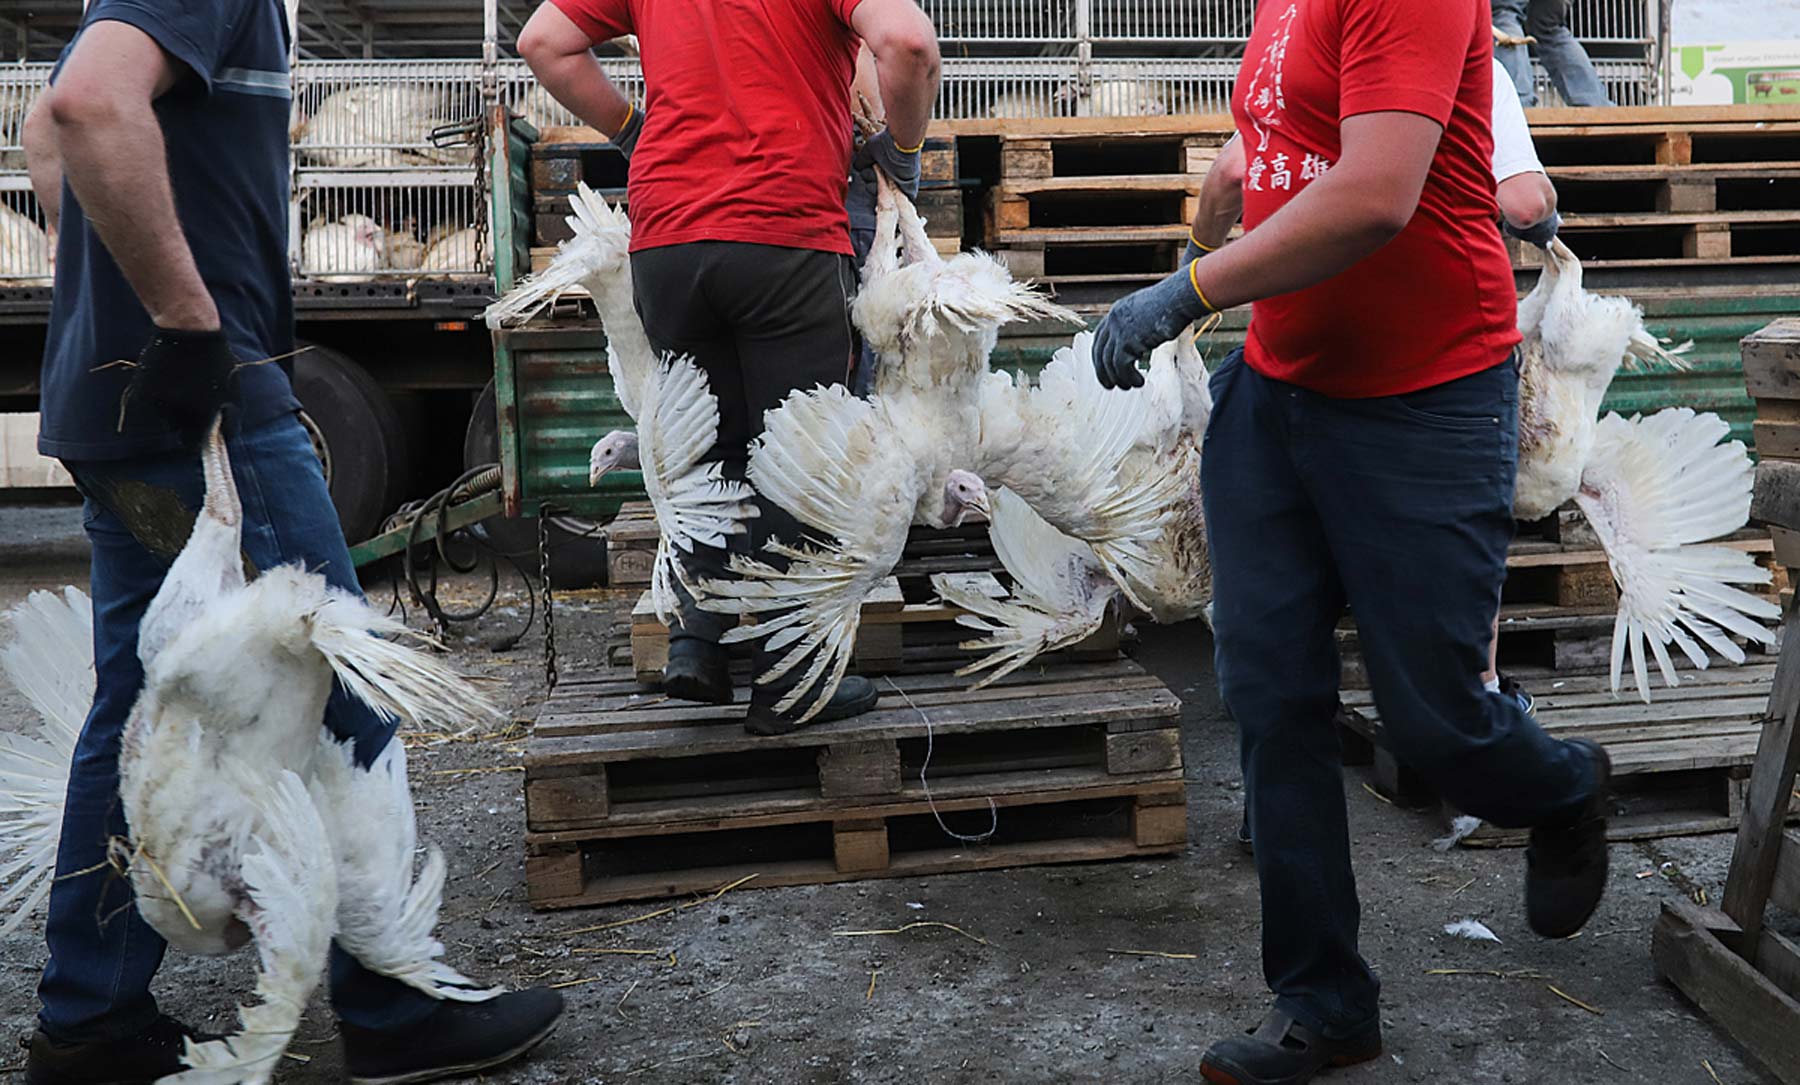 urkeys are caught by hand and thrown into cages on a truck heading to the slaughterhouse.